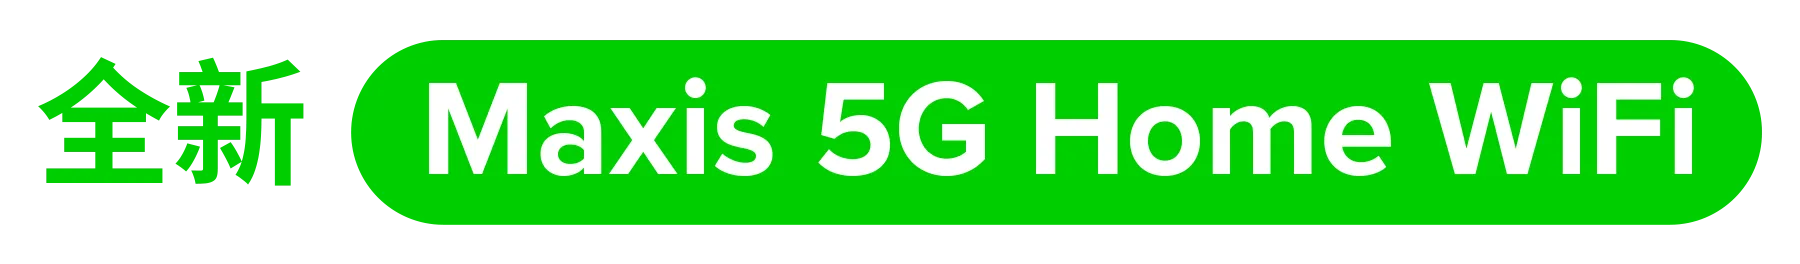 All New Maxis 5G Home WiFi